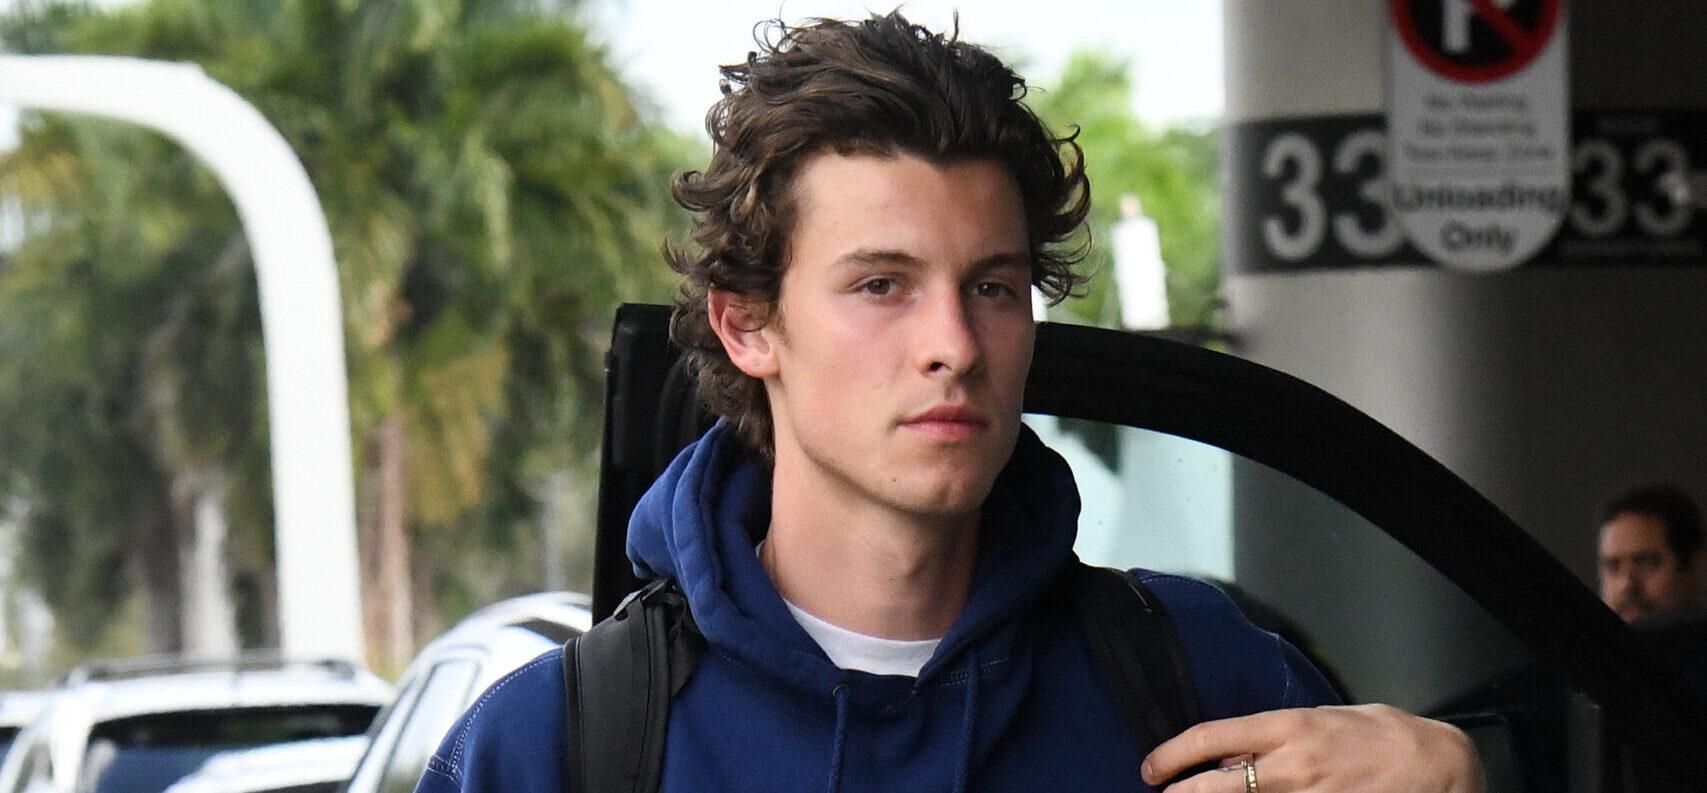 Shawn Mendes Was Dumped By Camila Cabello After Short Fling